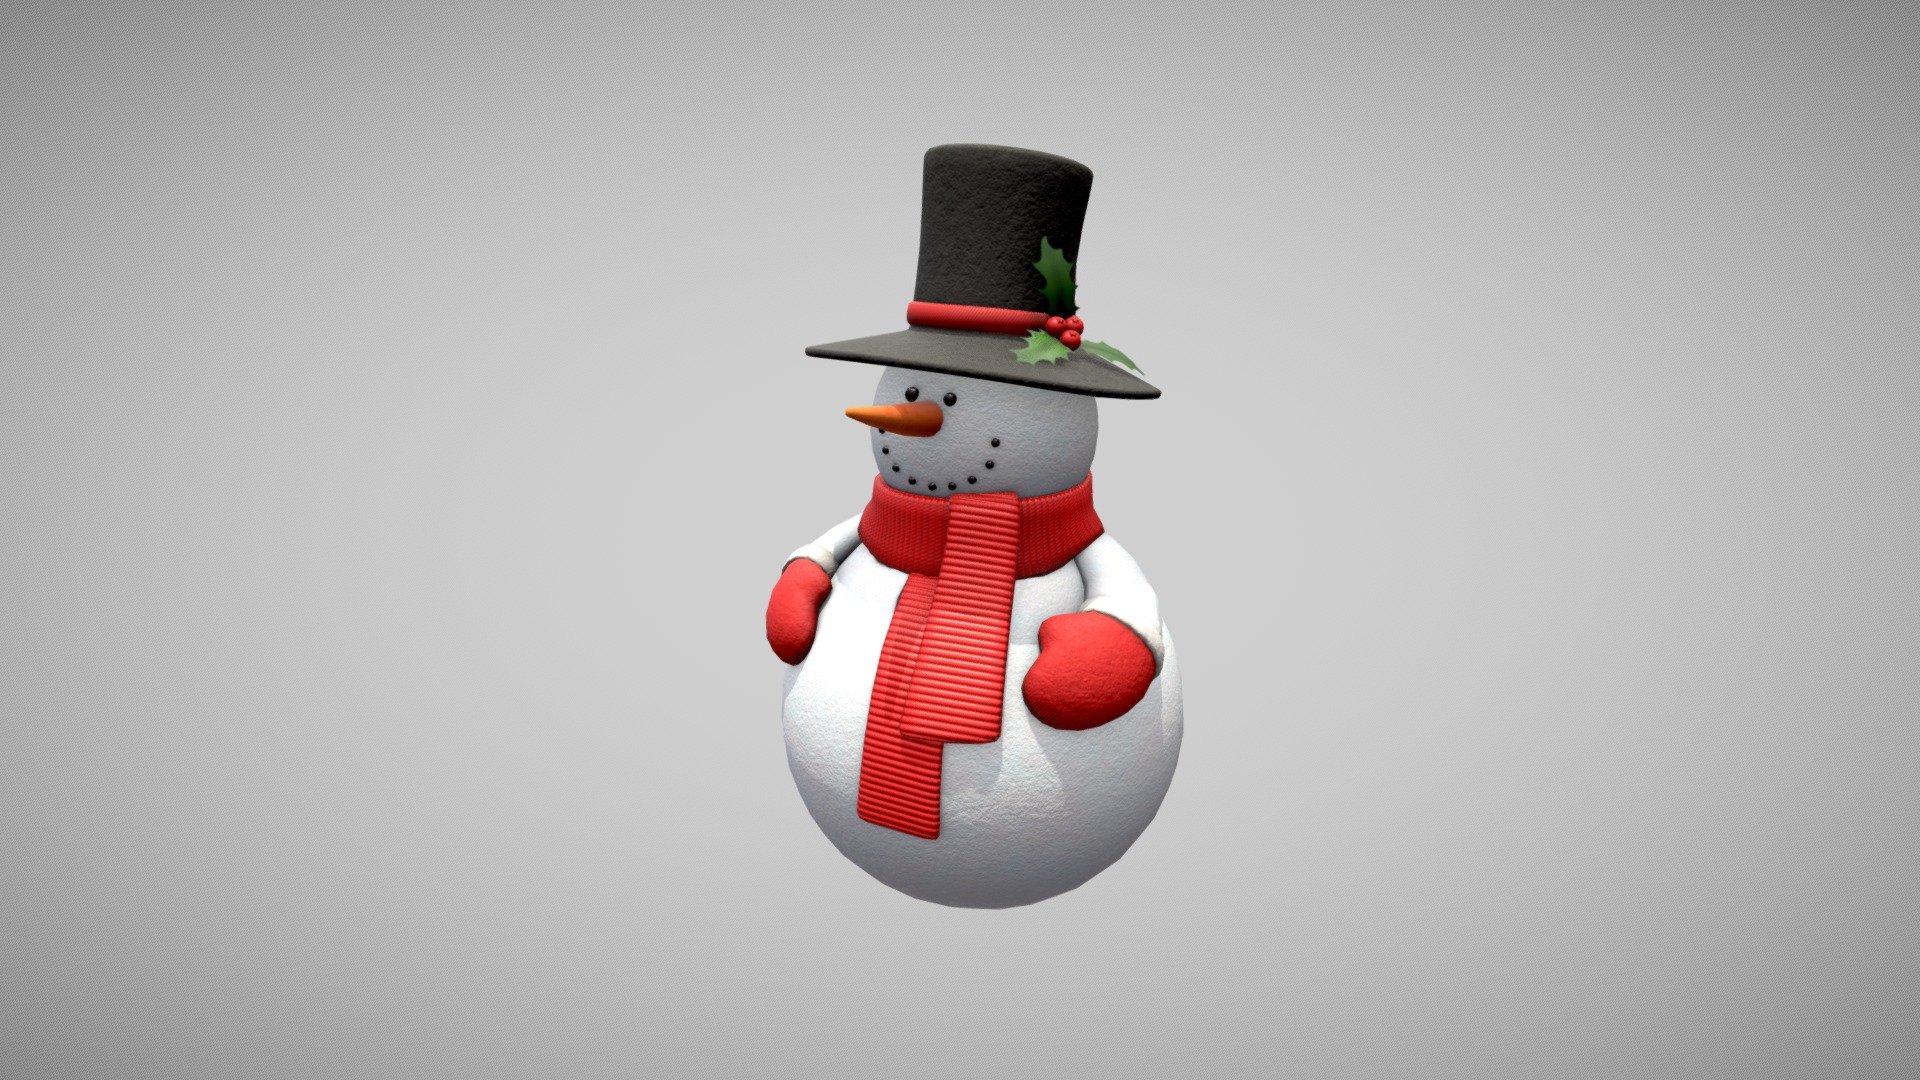 Modeled this snowman in anticipation of Christmas and New Year 3d model